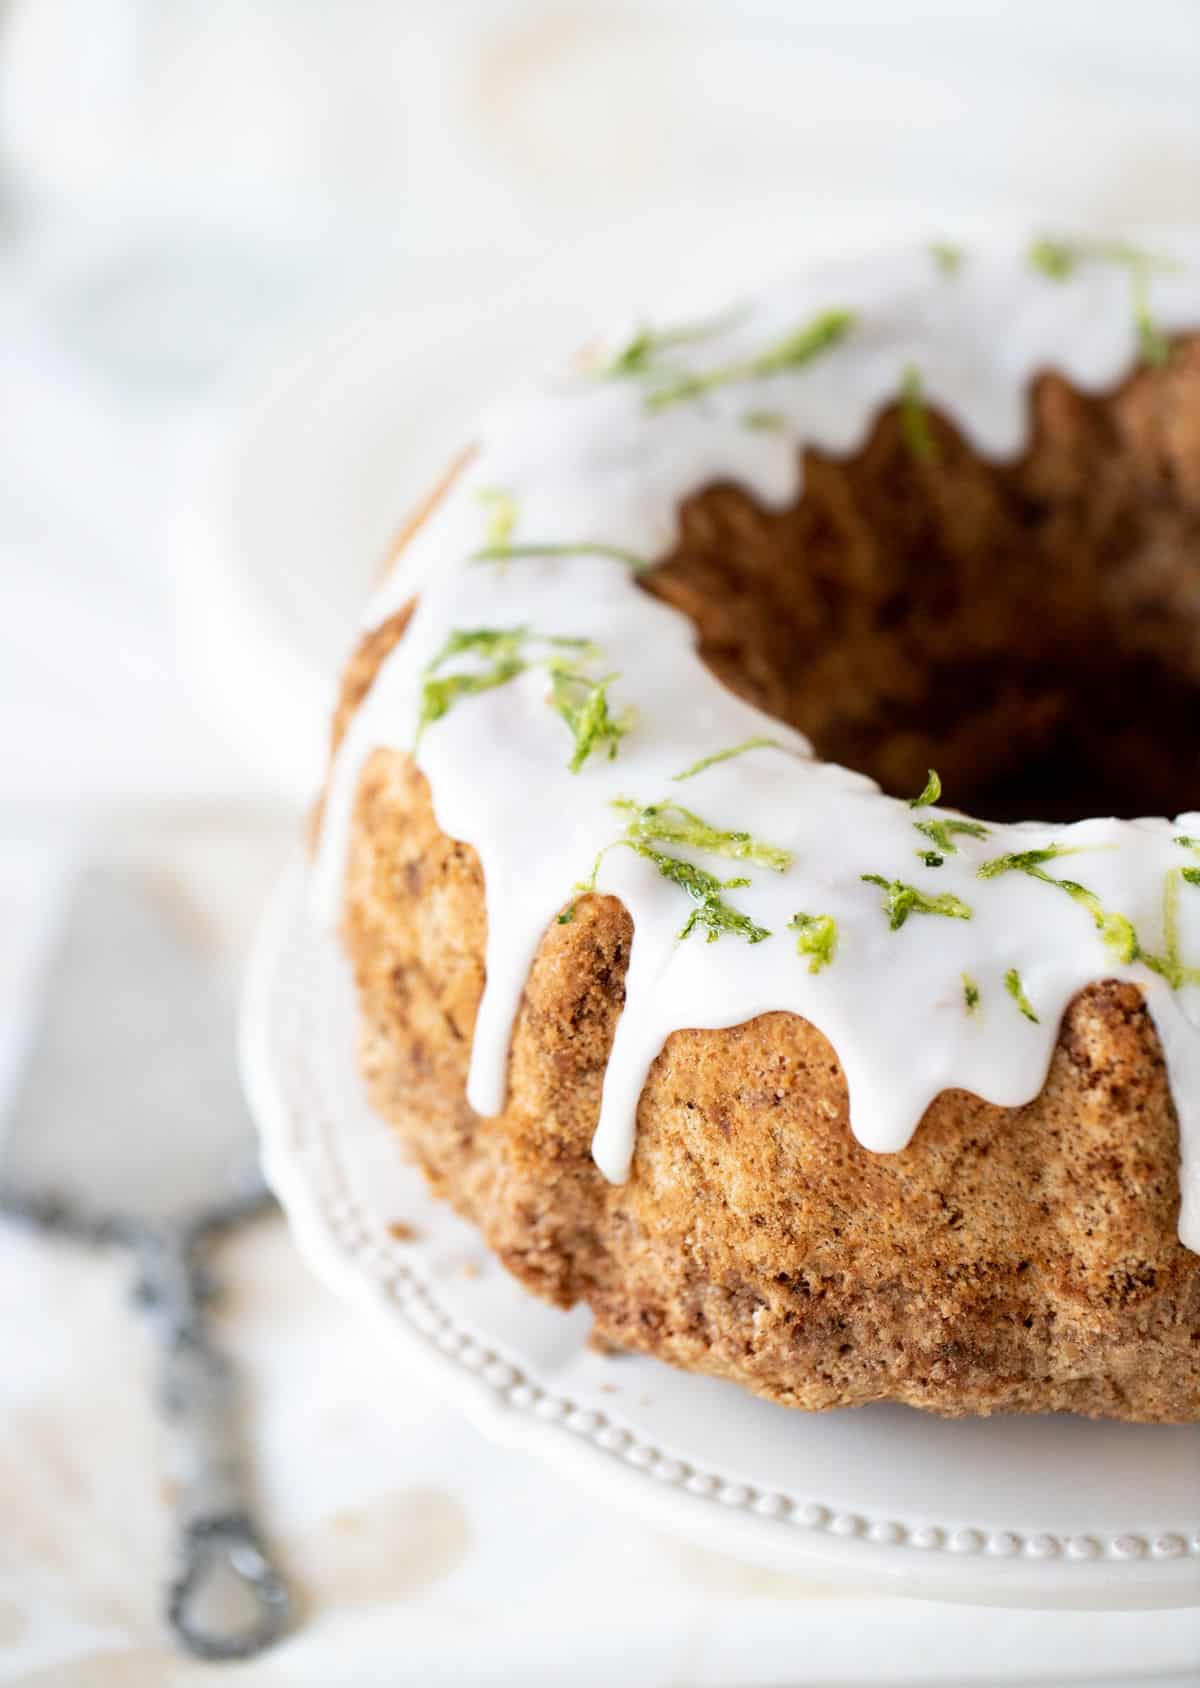 Top view of partial glazed bundt cake on white cake stand, silver cake server.